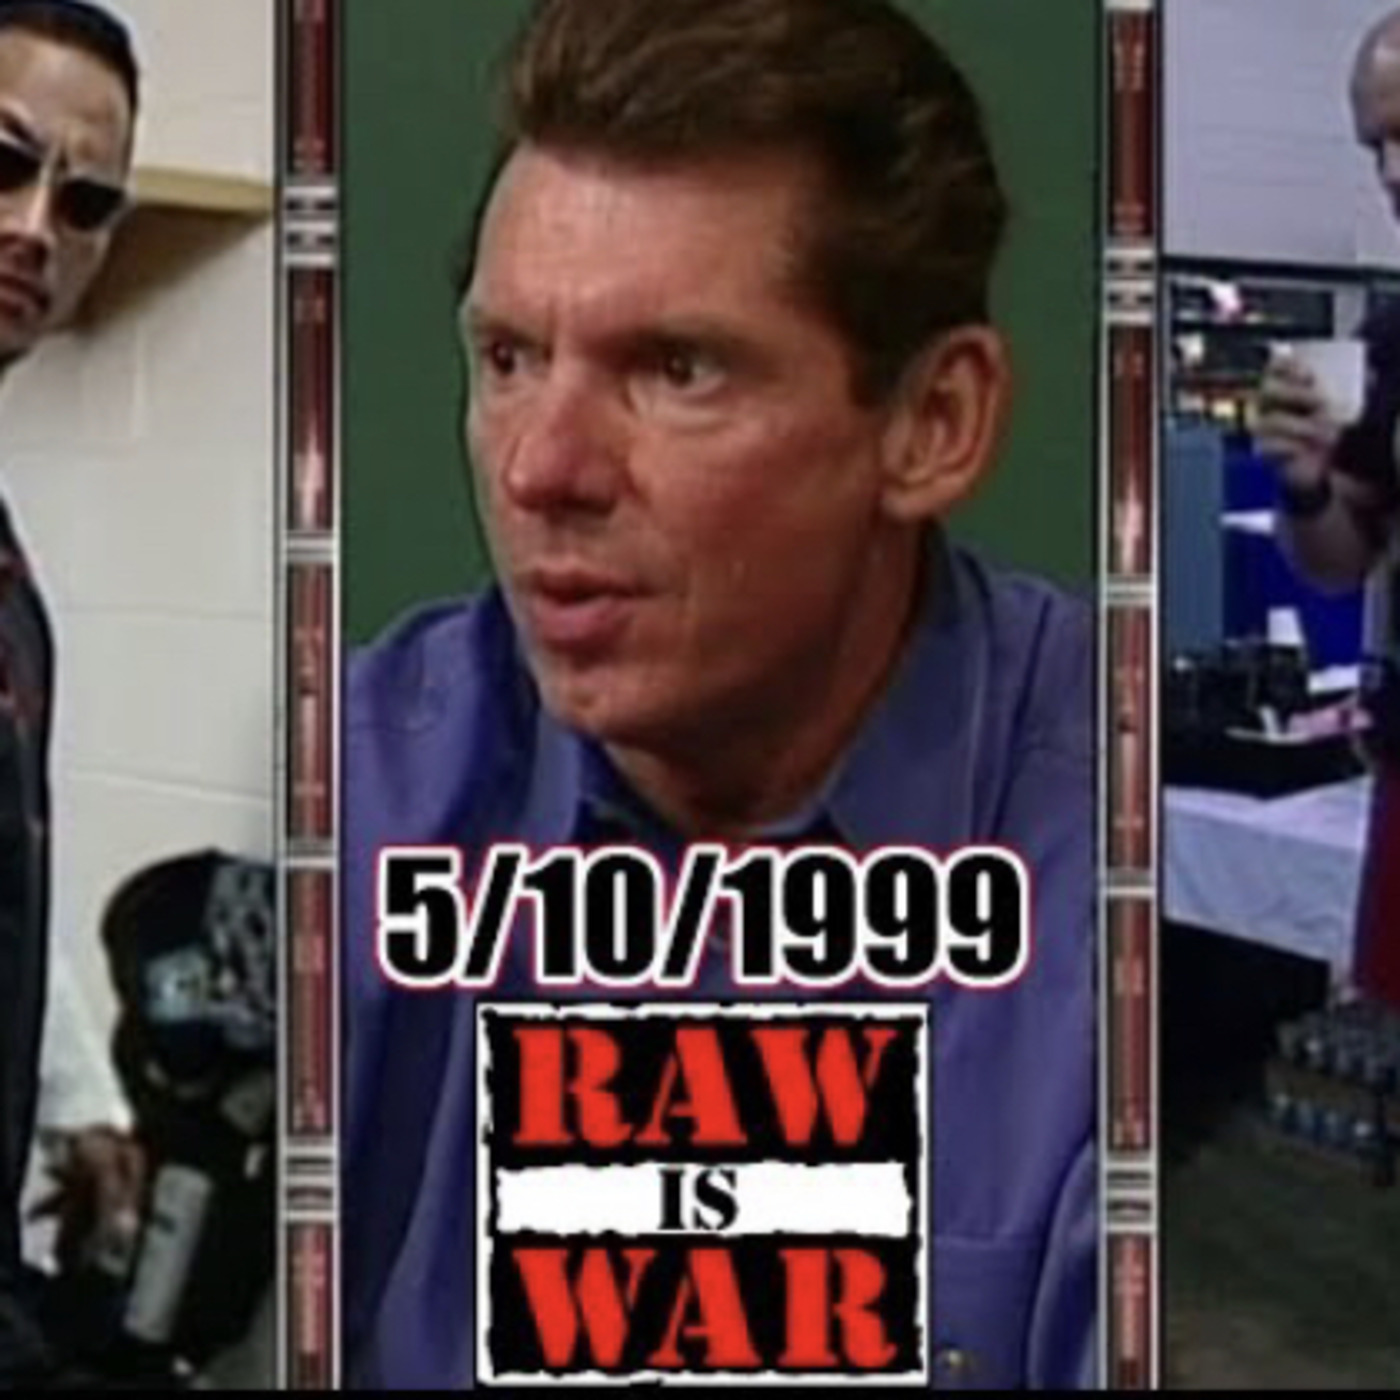 Episode 39: POZCAST - WWF RAW 5/10/99 (Highest Ratings Ever) with Vince Russo